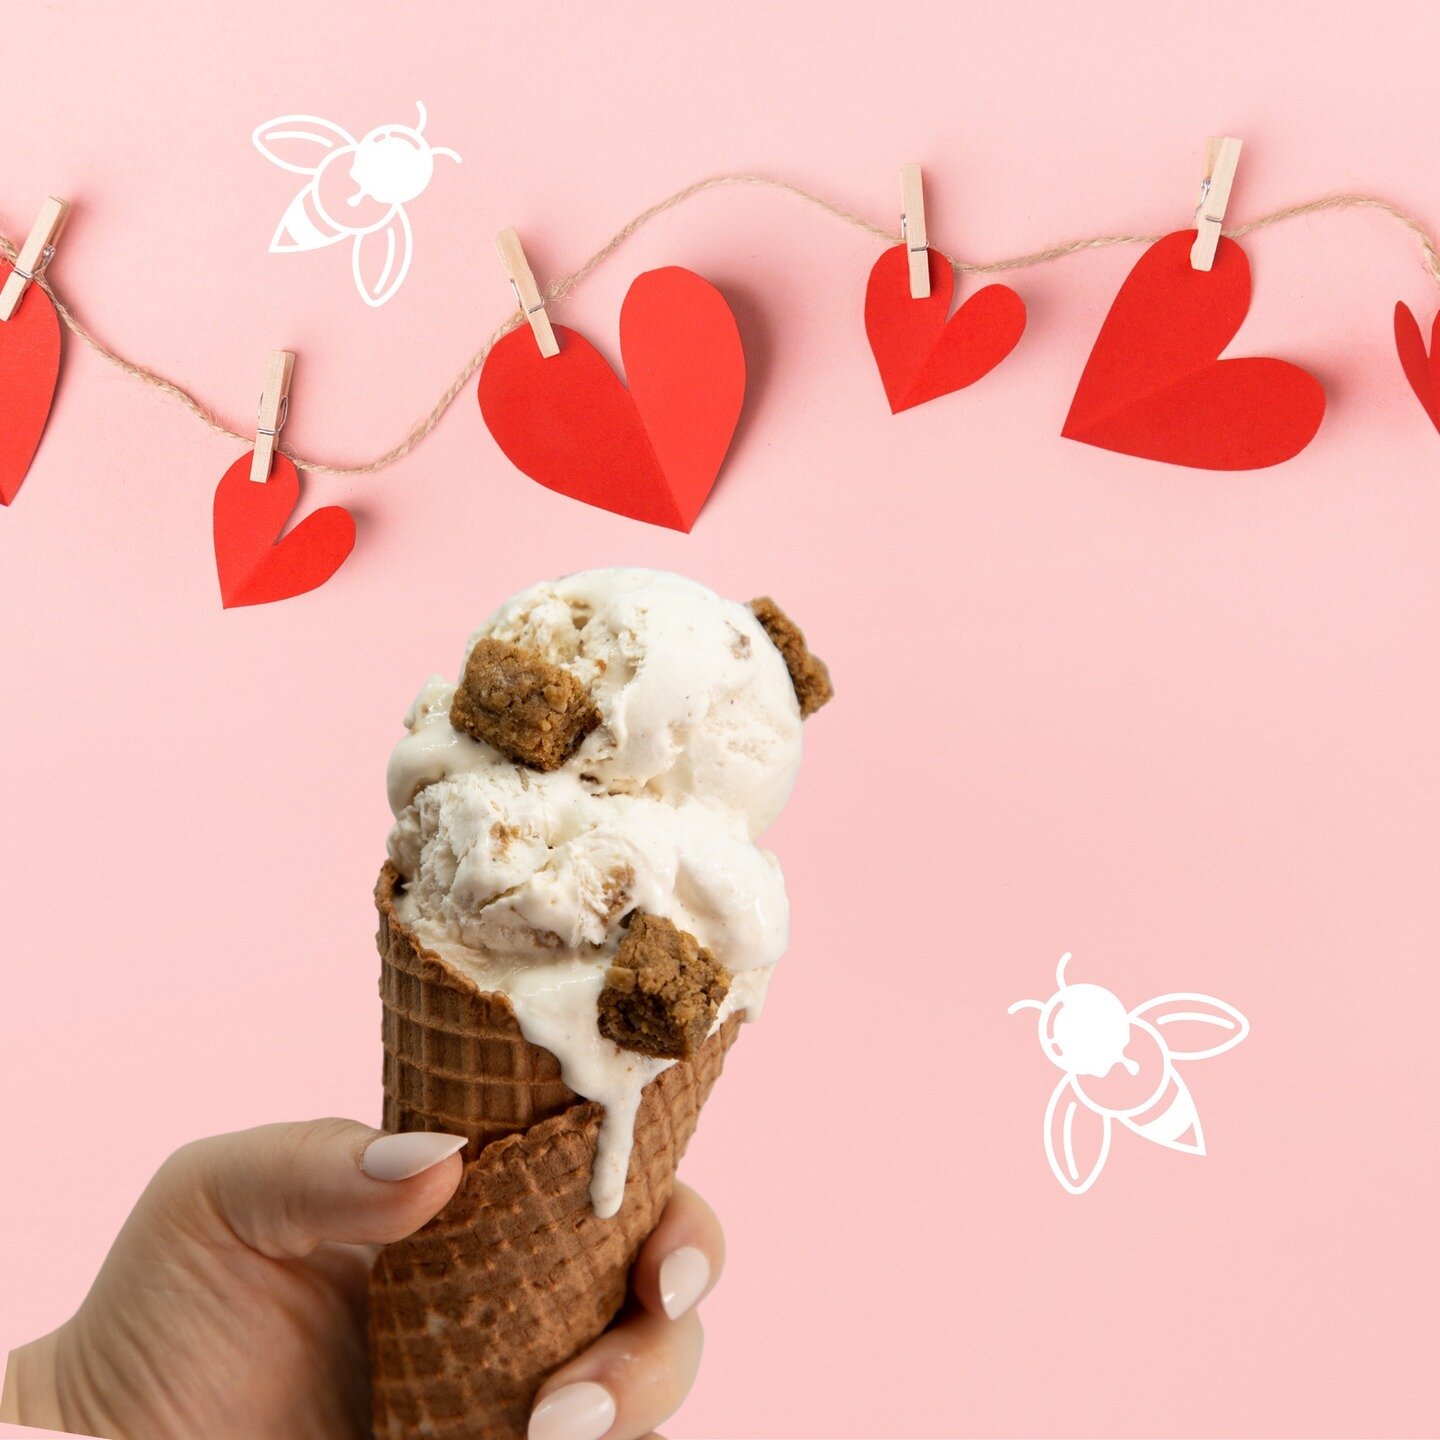 Take your sweetie to get a little sweet this week for Valentine's Day! Enjoy $2.00 off any flight or sundae to share the love, only on Valentine's Day 😍